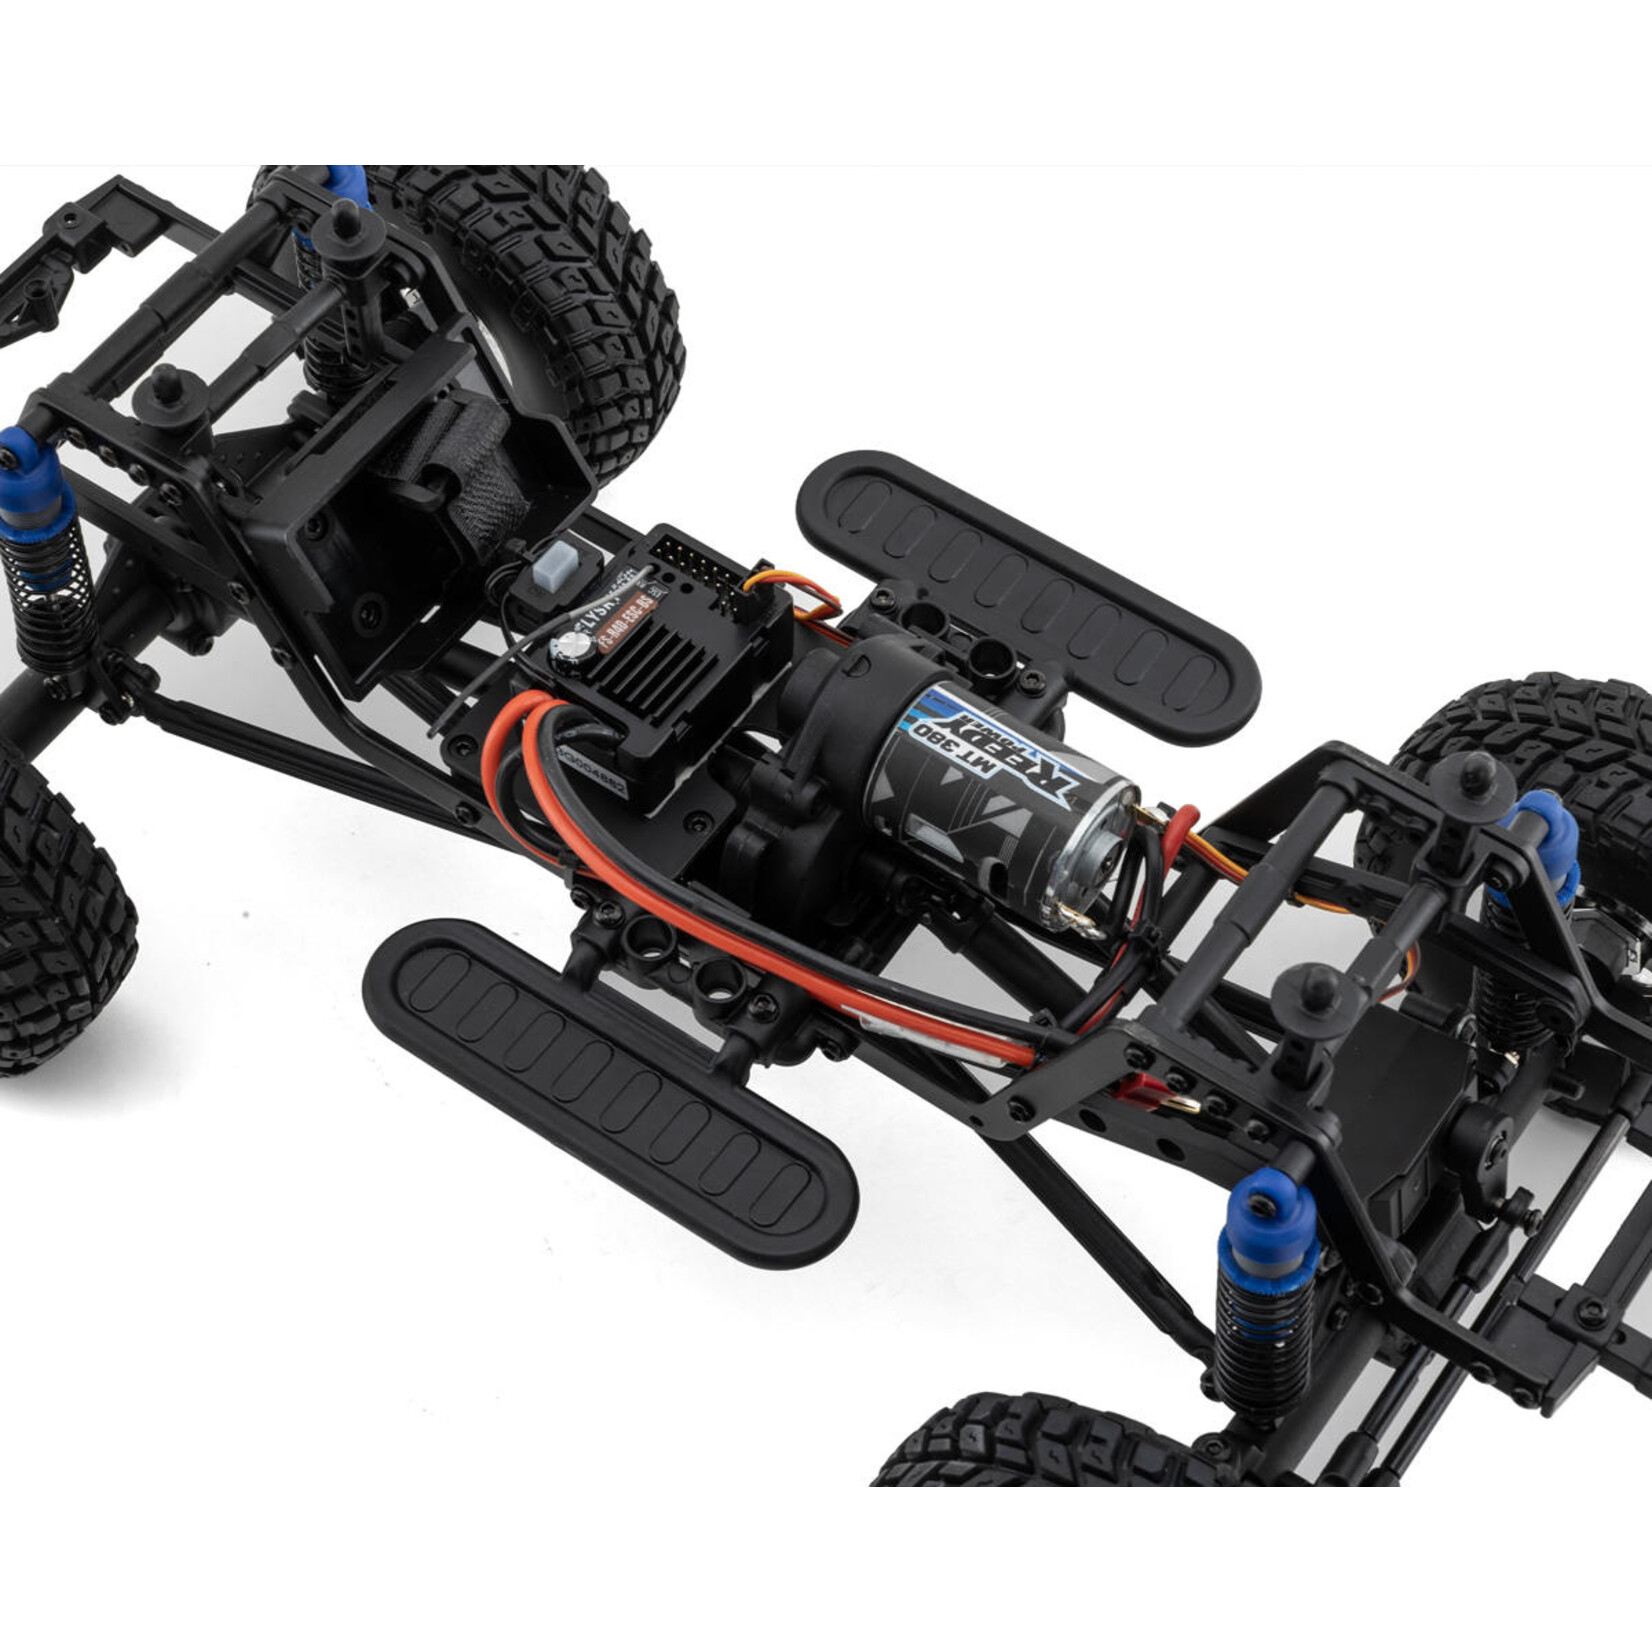 Element RC Element RC Enduro12 Sendero 1/12 4WD RTR Scale Mini Trail Truck w/2.4GHz Radio, Battery & Charger #40009C